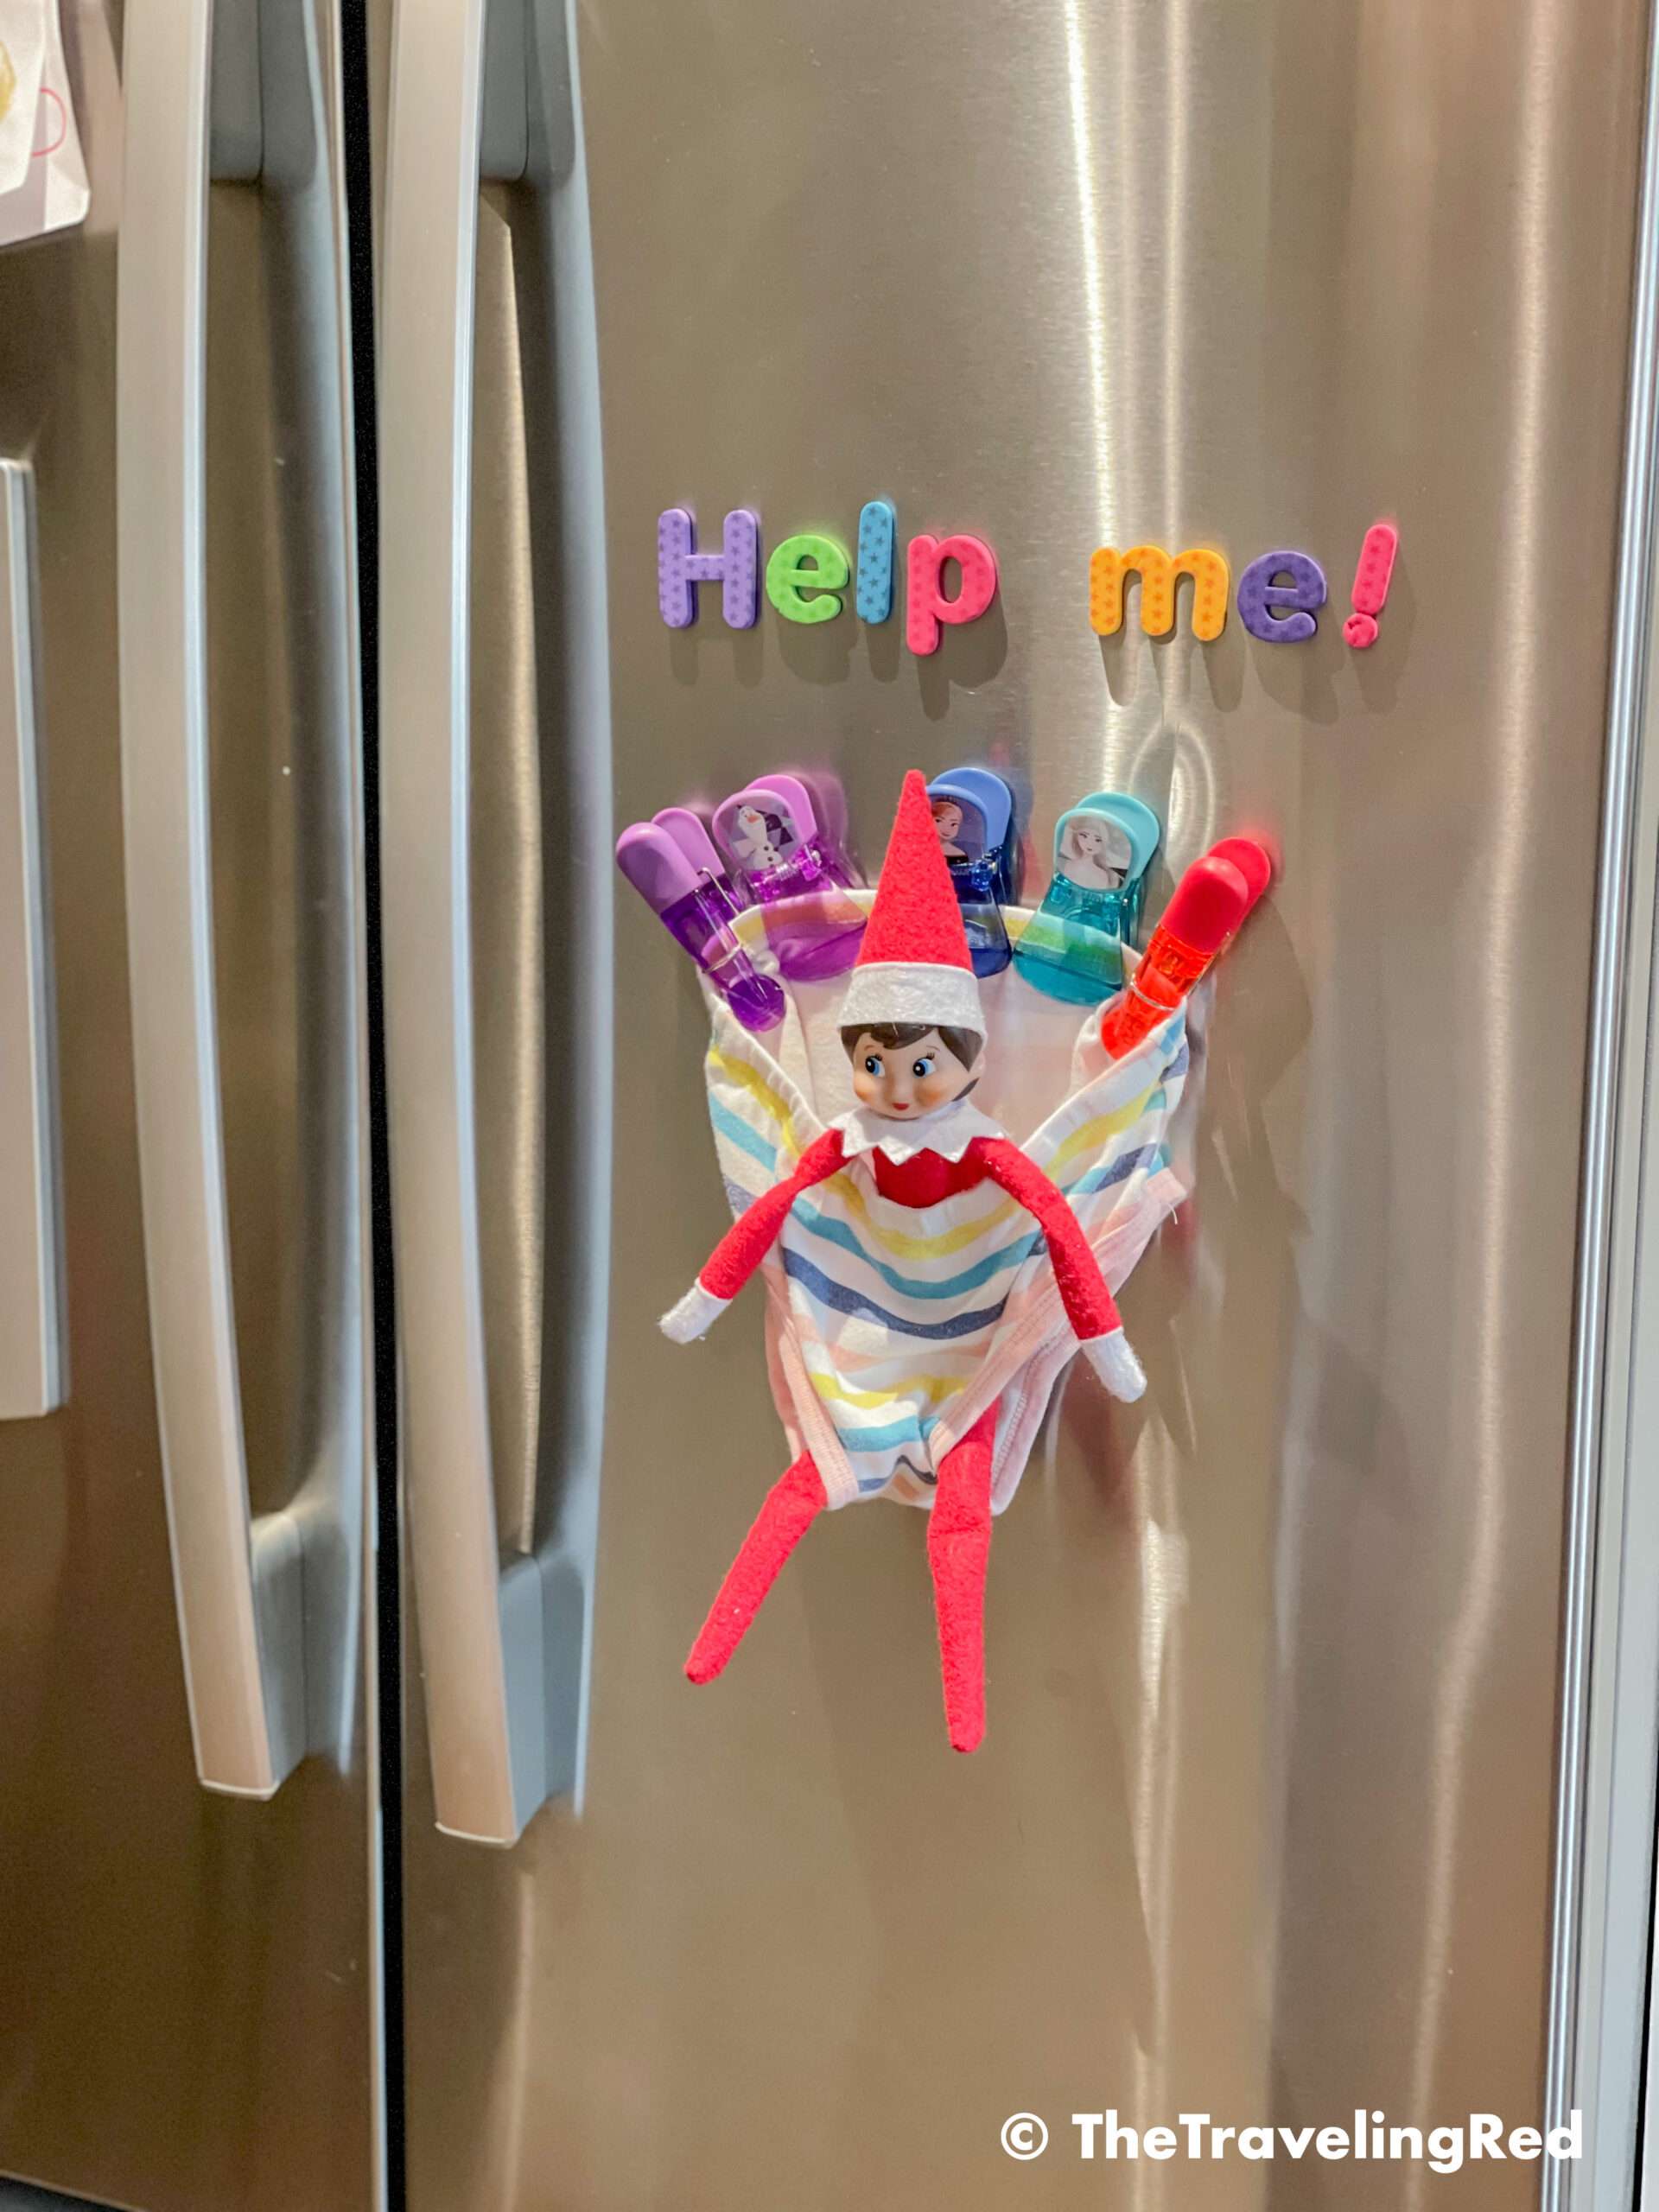 Naughty Elf on the shelf got stuck in an undie on our fridge. All you need is a panty, some magnet clips or tape and possibly a fun message. Fun and easy elf on the shelf ideas for a naughty elf that are quick and easy using things you have at home.